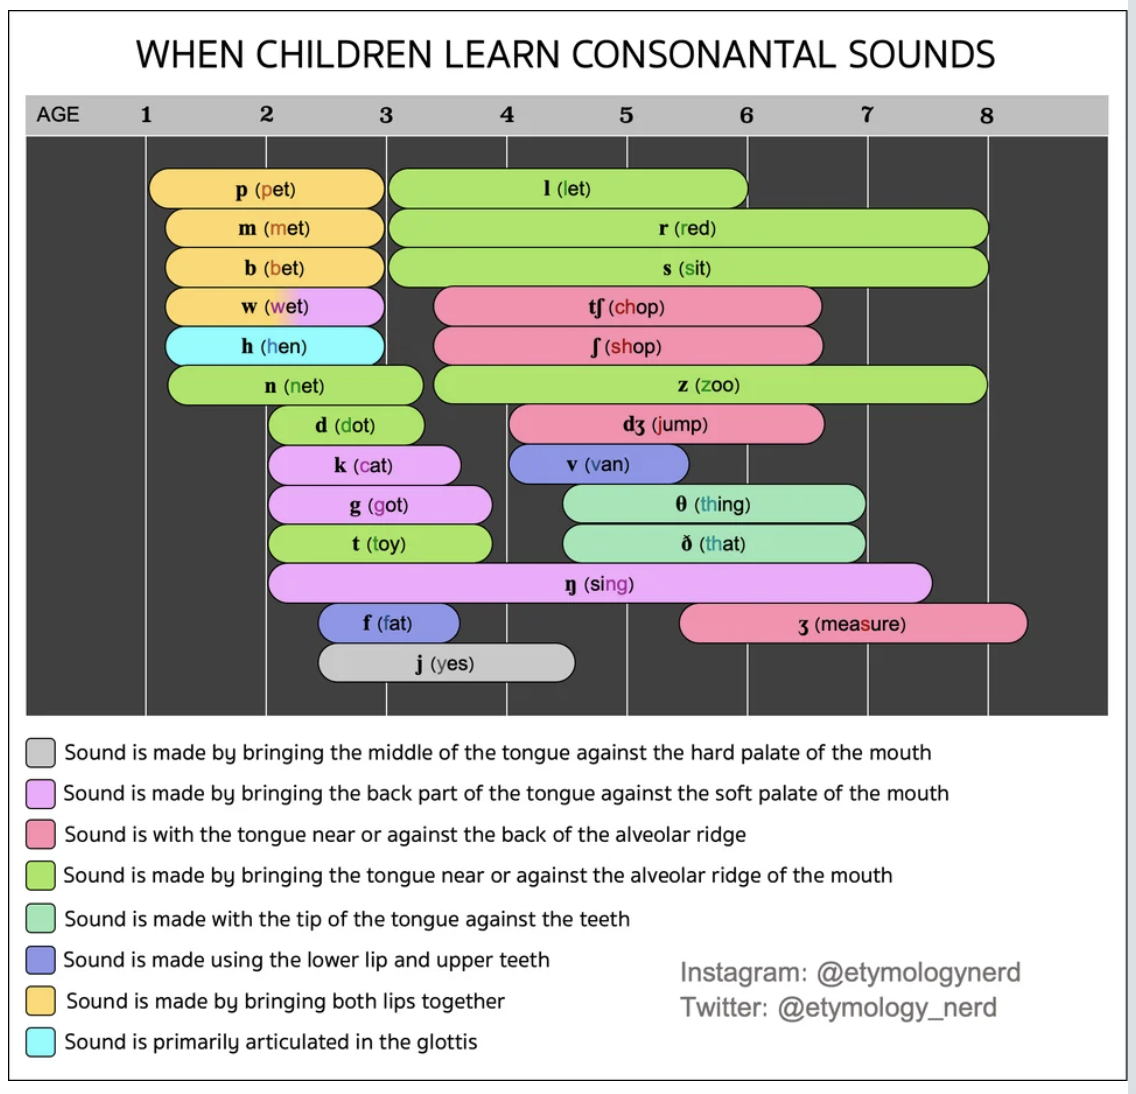 Color-coded chart showing consonants learned earlier, 1–3 (such as p, m, b, and w) and those earned later, 3–8 (such as l, r, and s), and how the sounds are formed